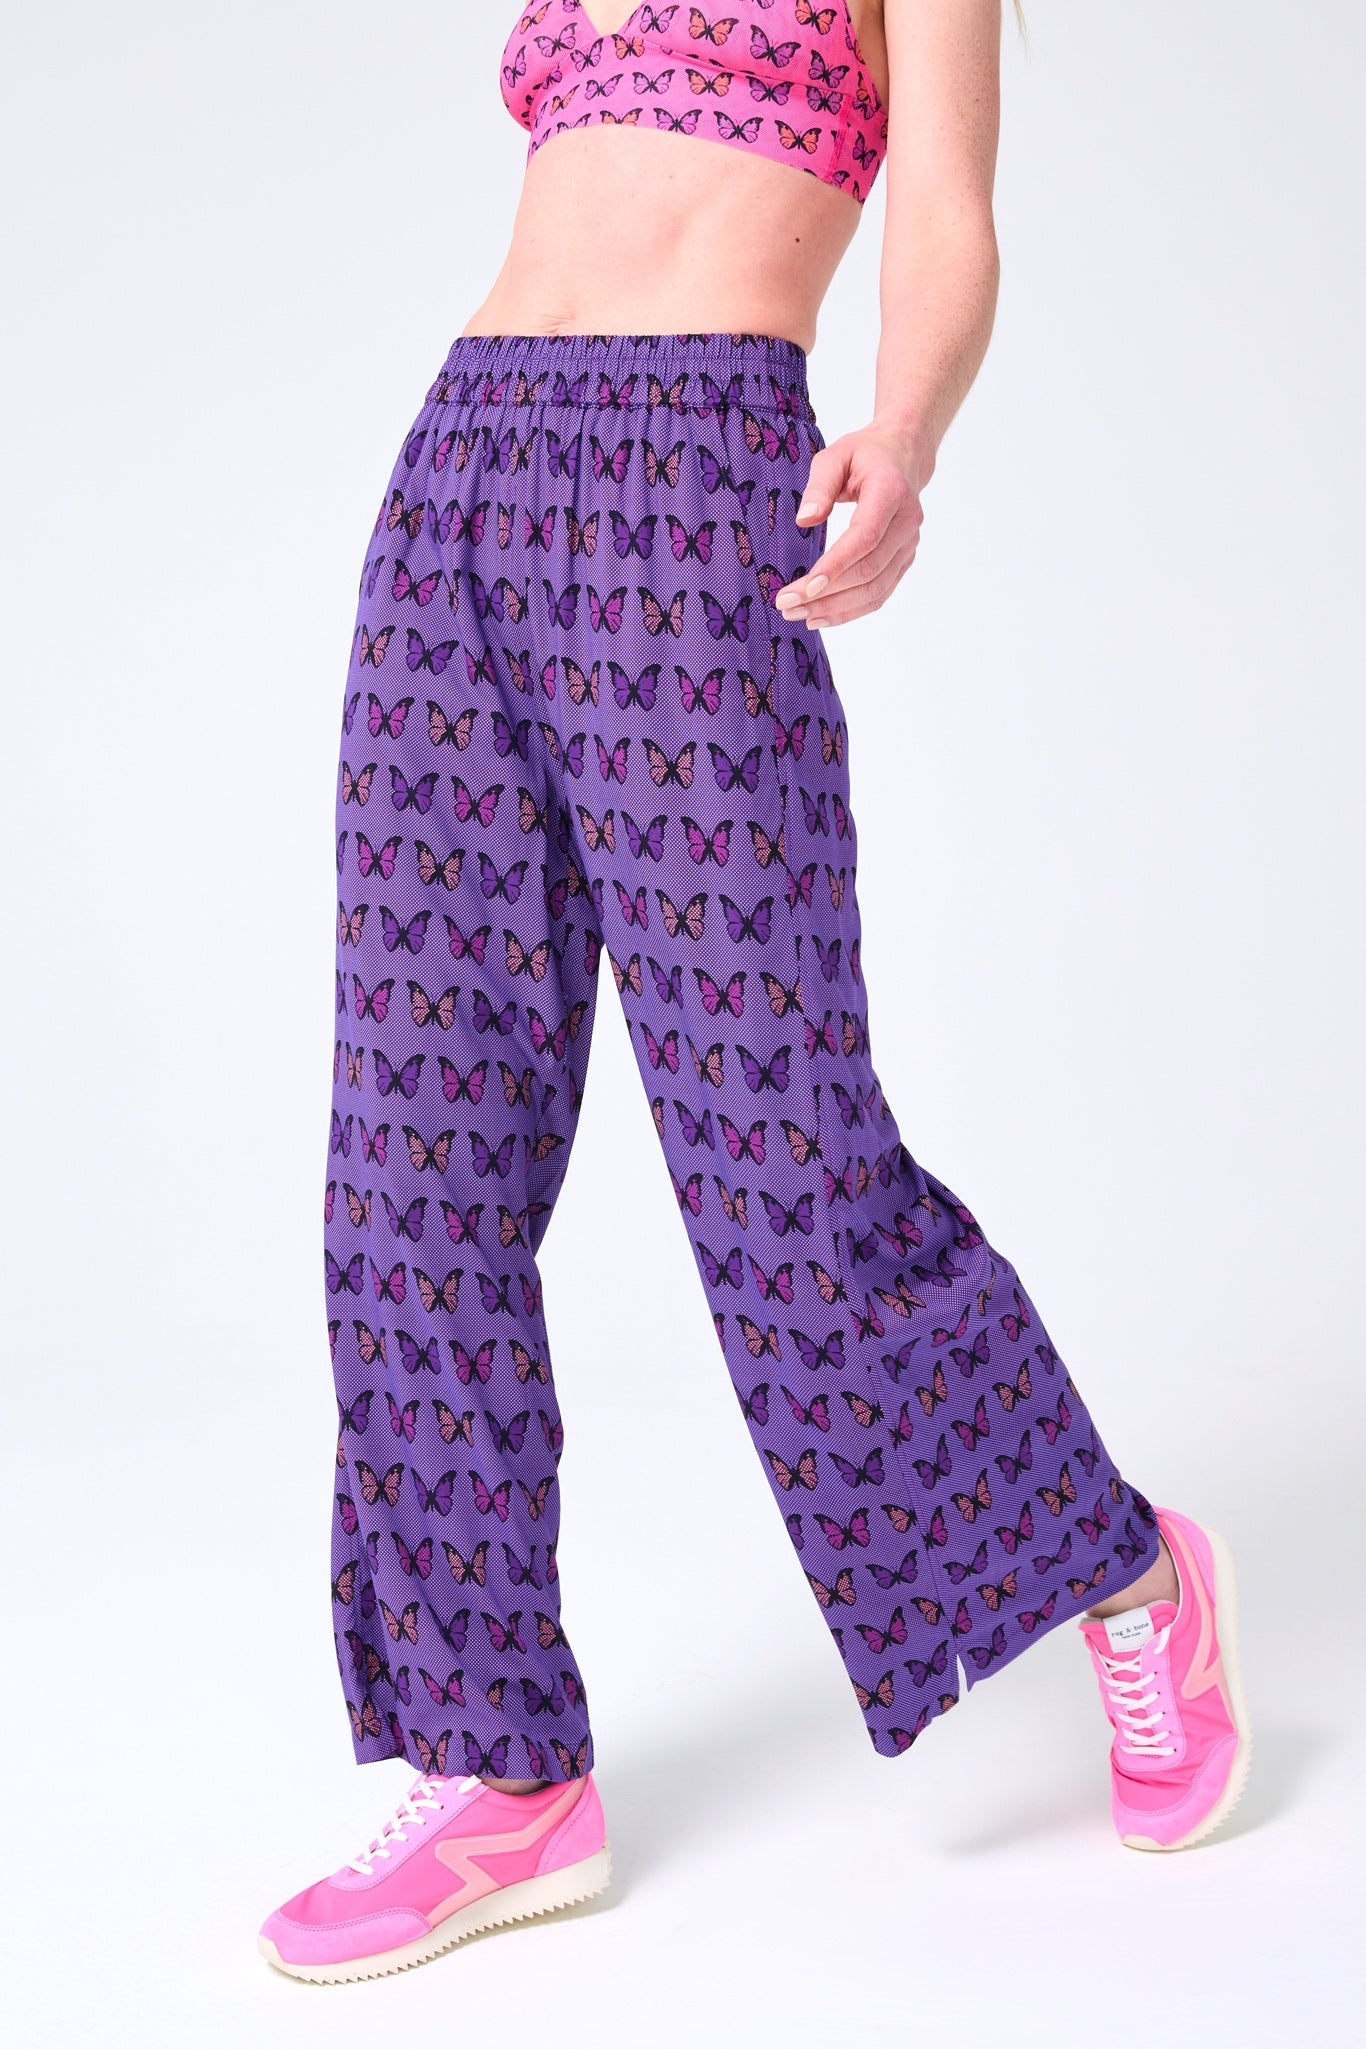 Pant in Halftone Butterfly